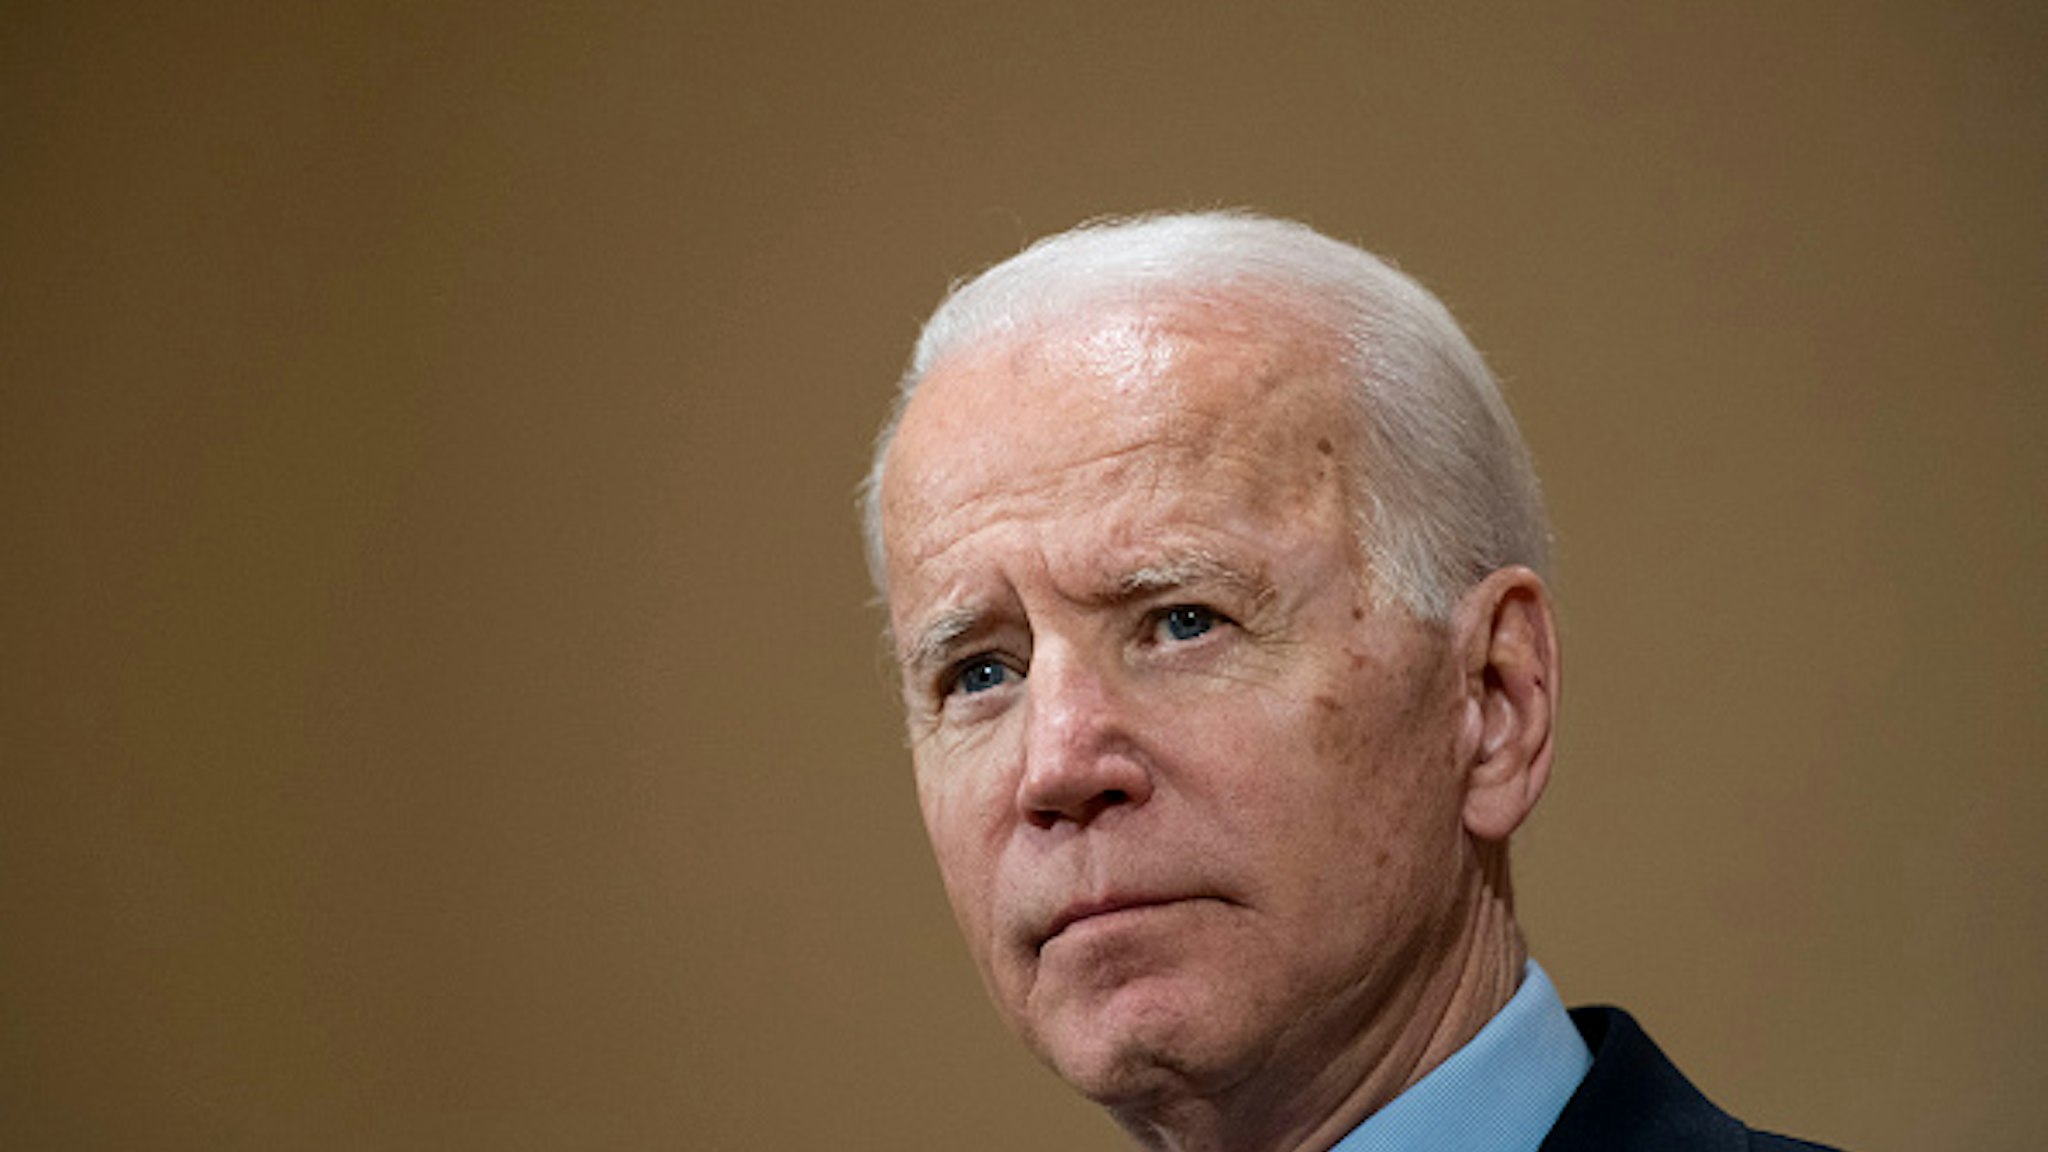 COLUMBUS, OH - MARCH 10: Former Vice President Joe Biden speaks at the Driving Park Community Center in Columbus, OH on March 10, 2020.